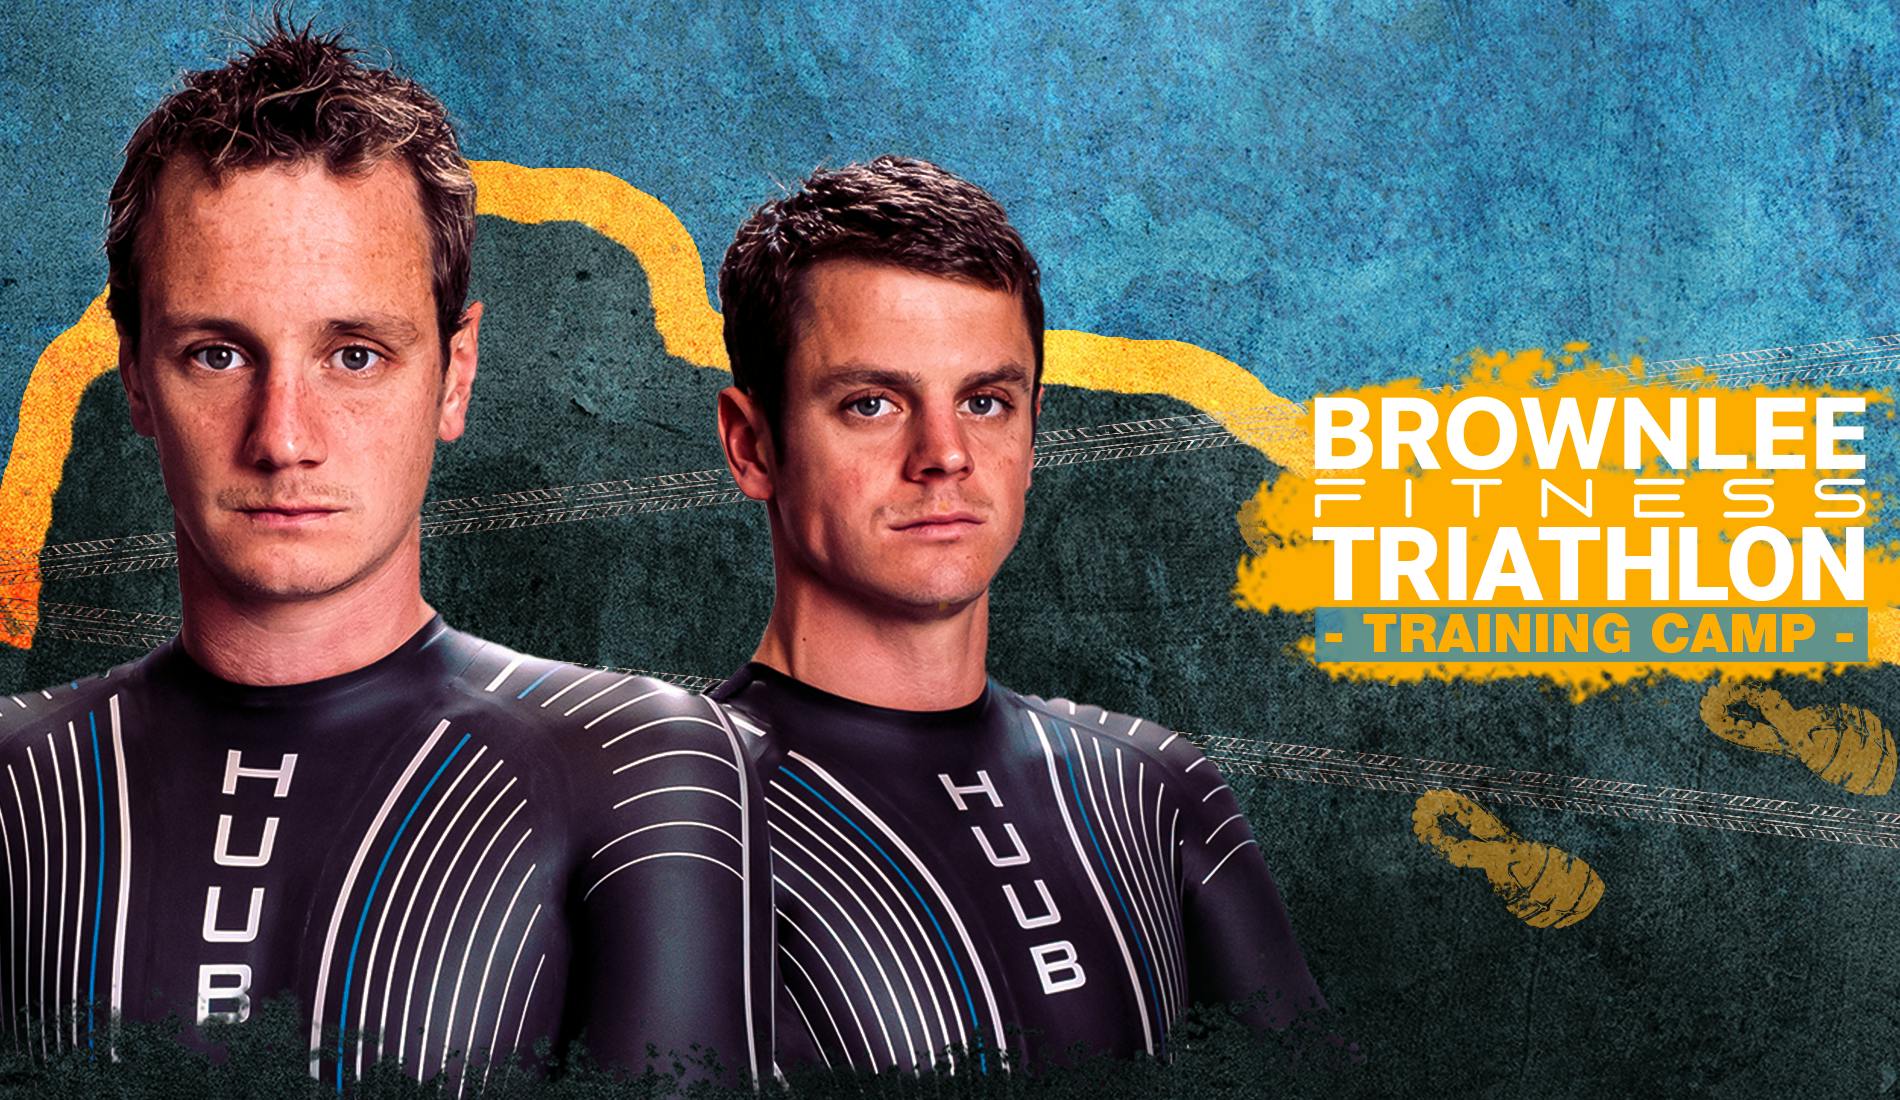 brownlee brothers event image